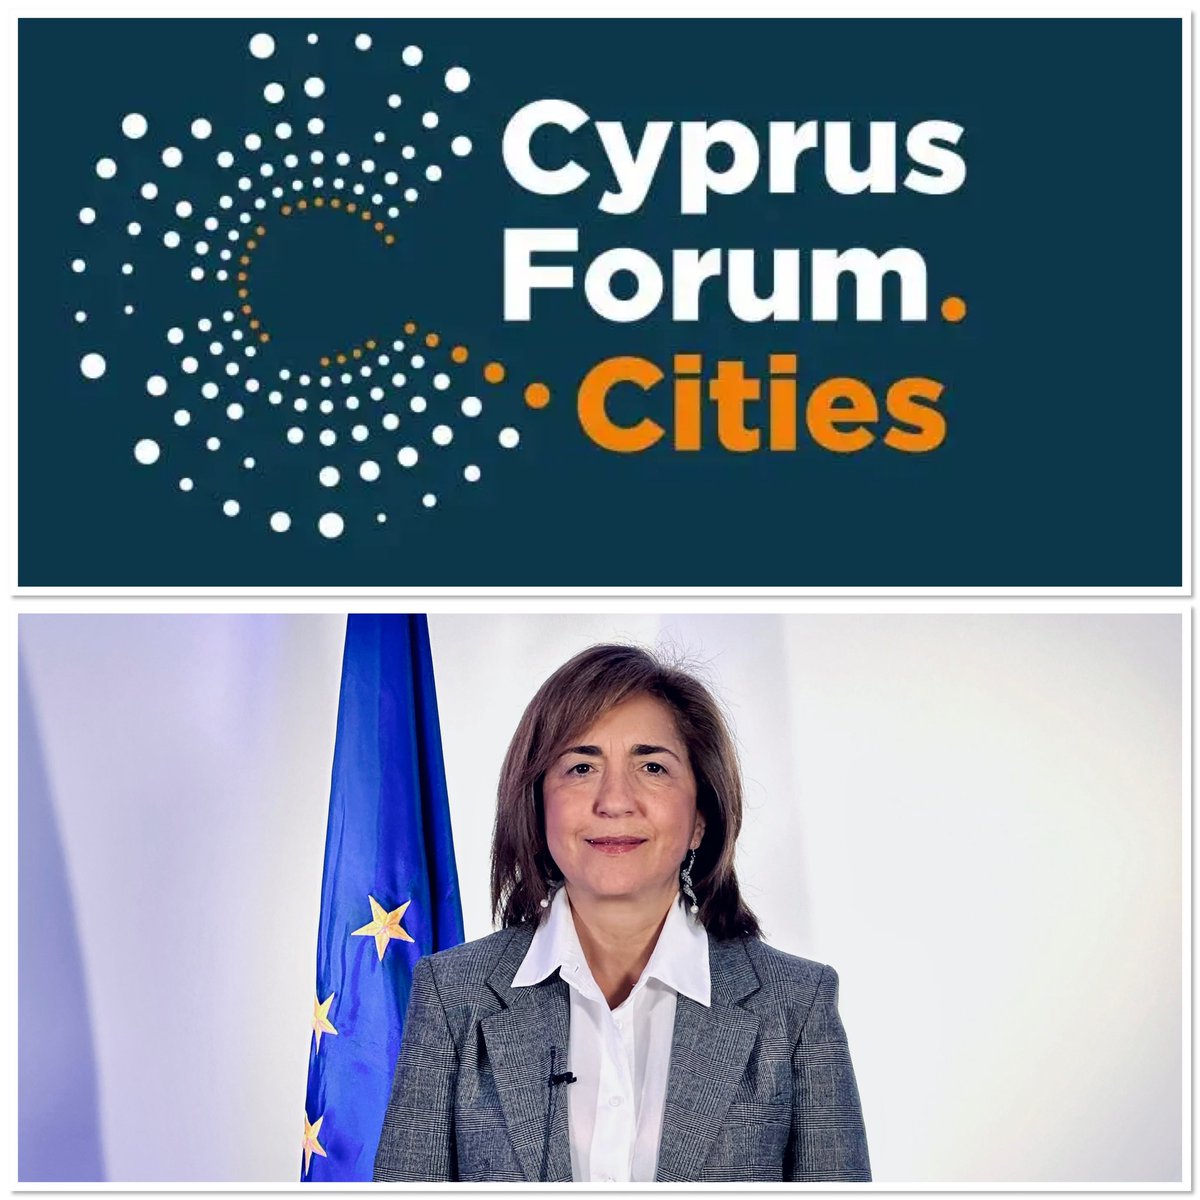 Resilient & thriving urban areas are key to shaping so many aspects of our daily lives
As over 80% of all EU citizens are expected to live in cities by 2050
#CohesionPolicy is the main EU investment tool supporting cities, w/ more than €100 billion
Opening the #CyprusForumCities